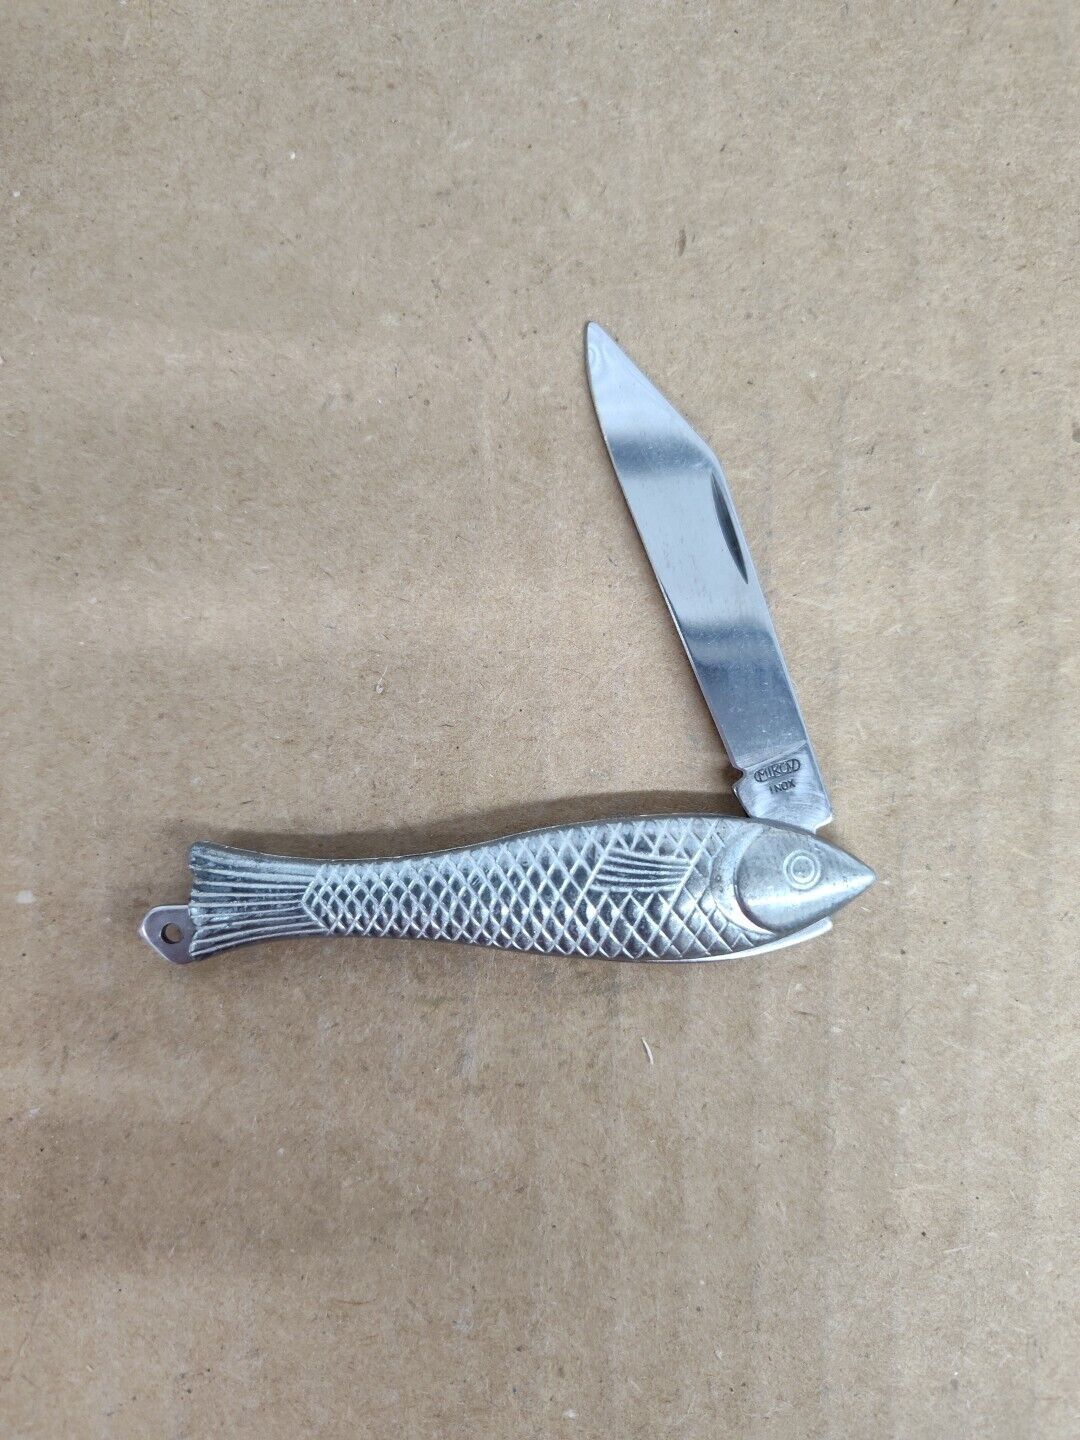 Mikov Inox Folding Knife with Fish Shaped Handle